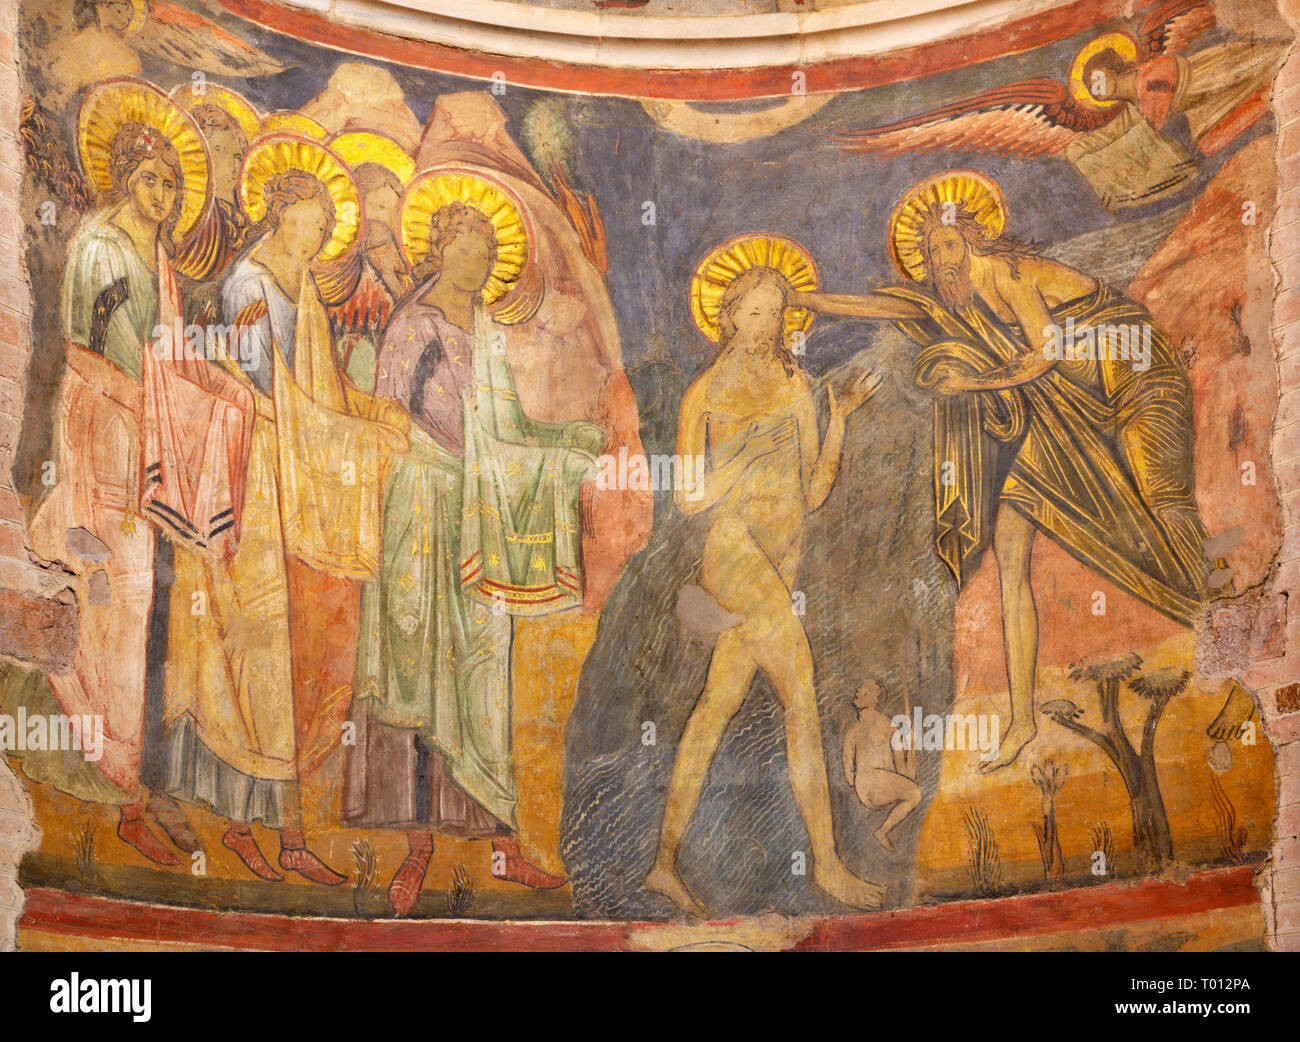 PARMA, ITALY - APRIL 16, 2018: The fresco Baptism of Jesus in byzantine iconic style in Baptistery from craftsmen from the Emilia region Stock Photo